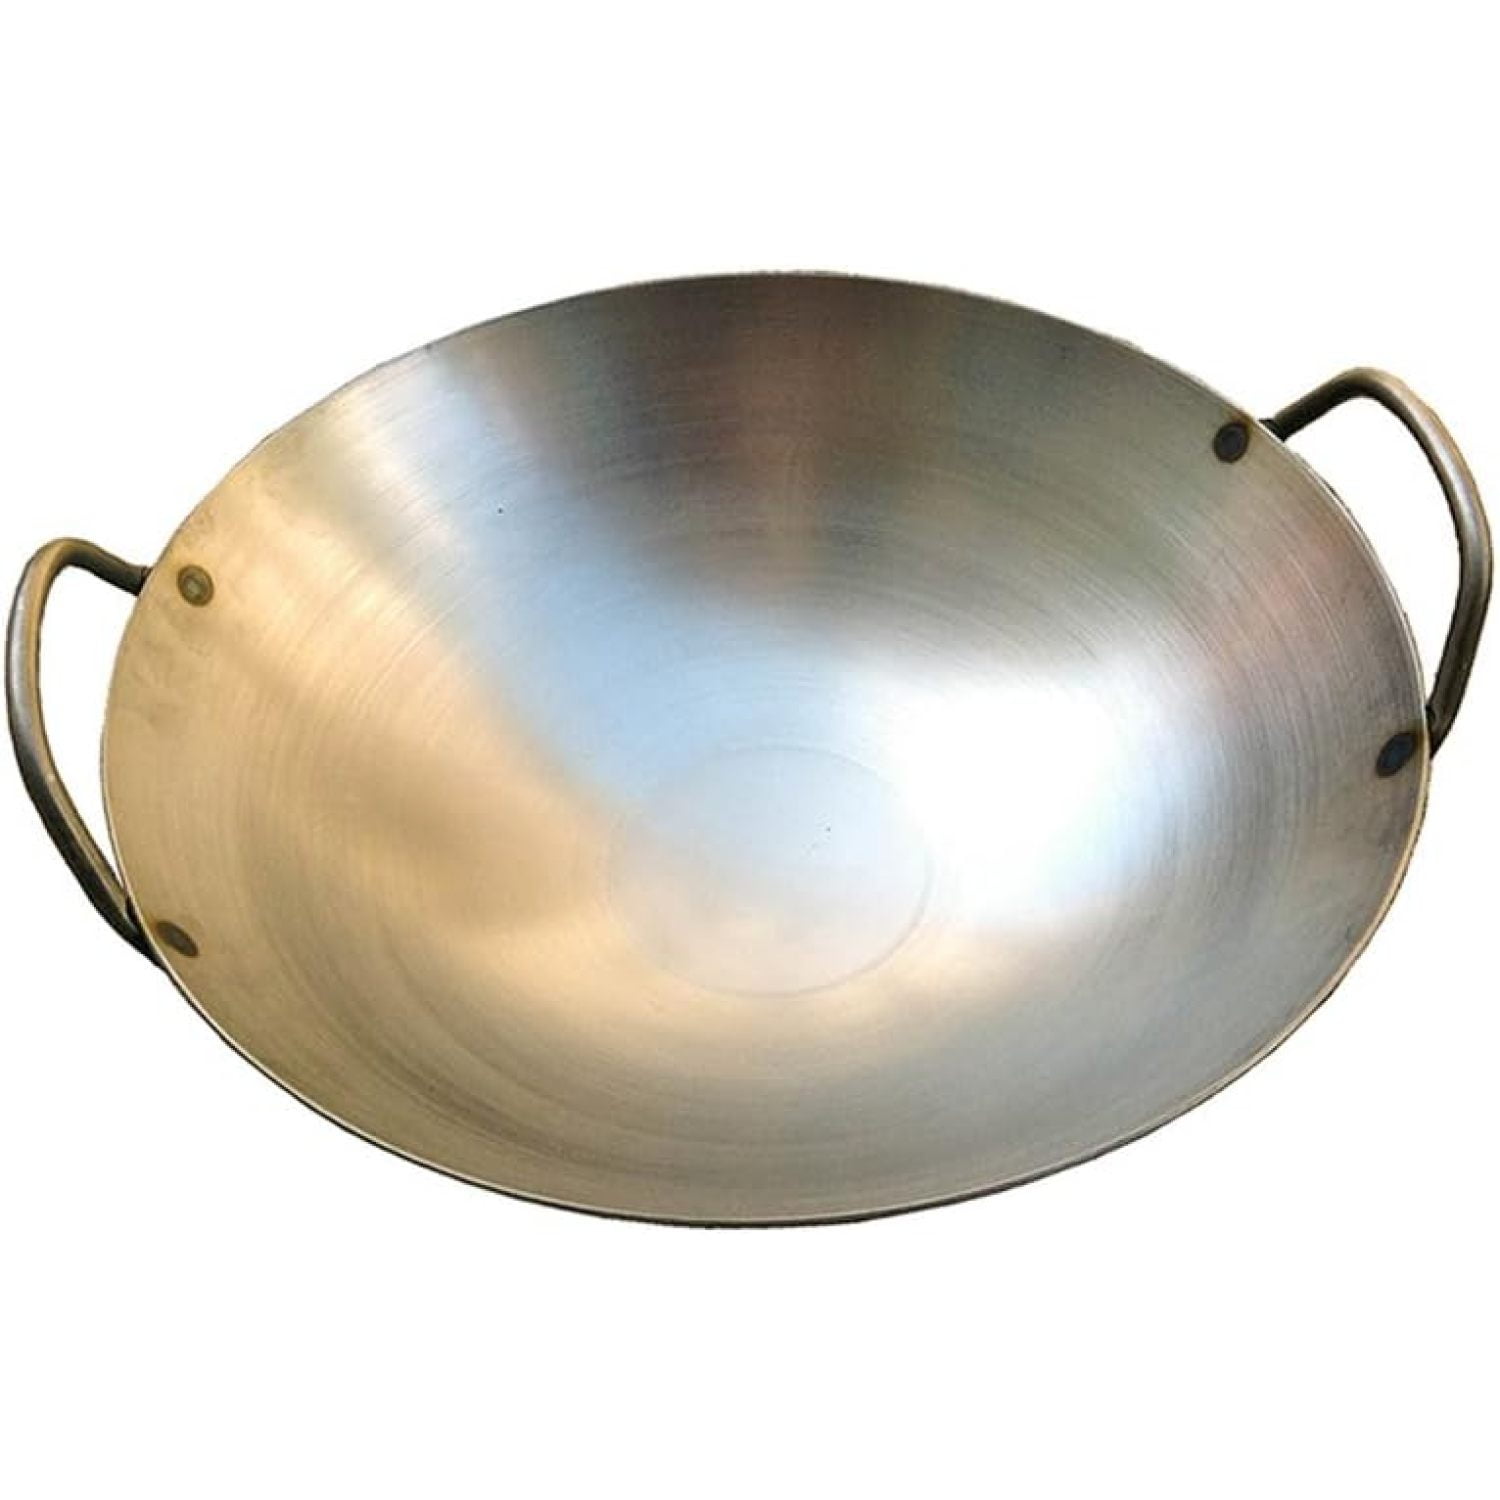 Wok pan - 1st quality, round base with handle, without ear, Ø 30cm, 1 pc,  loose